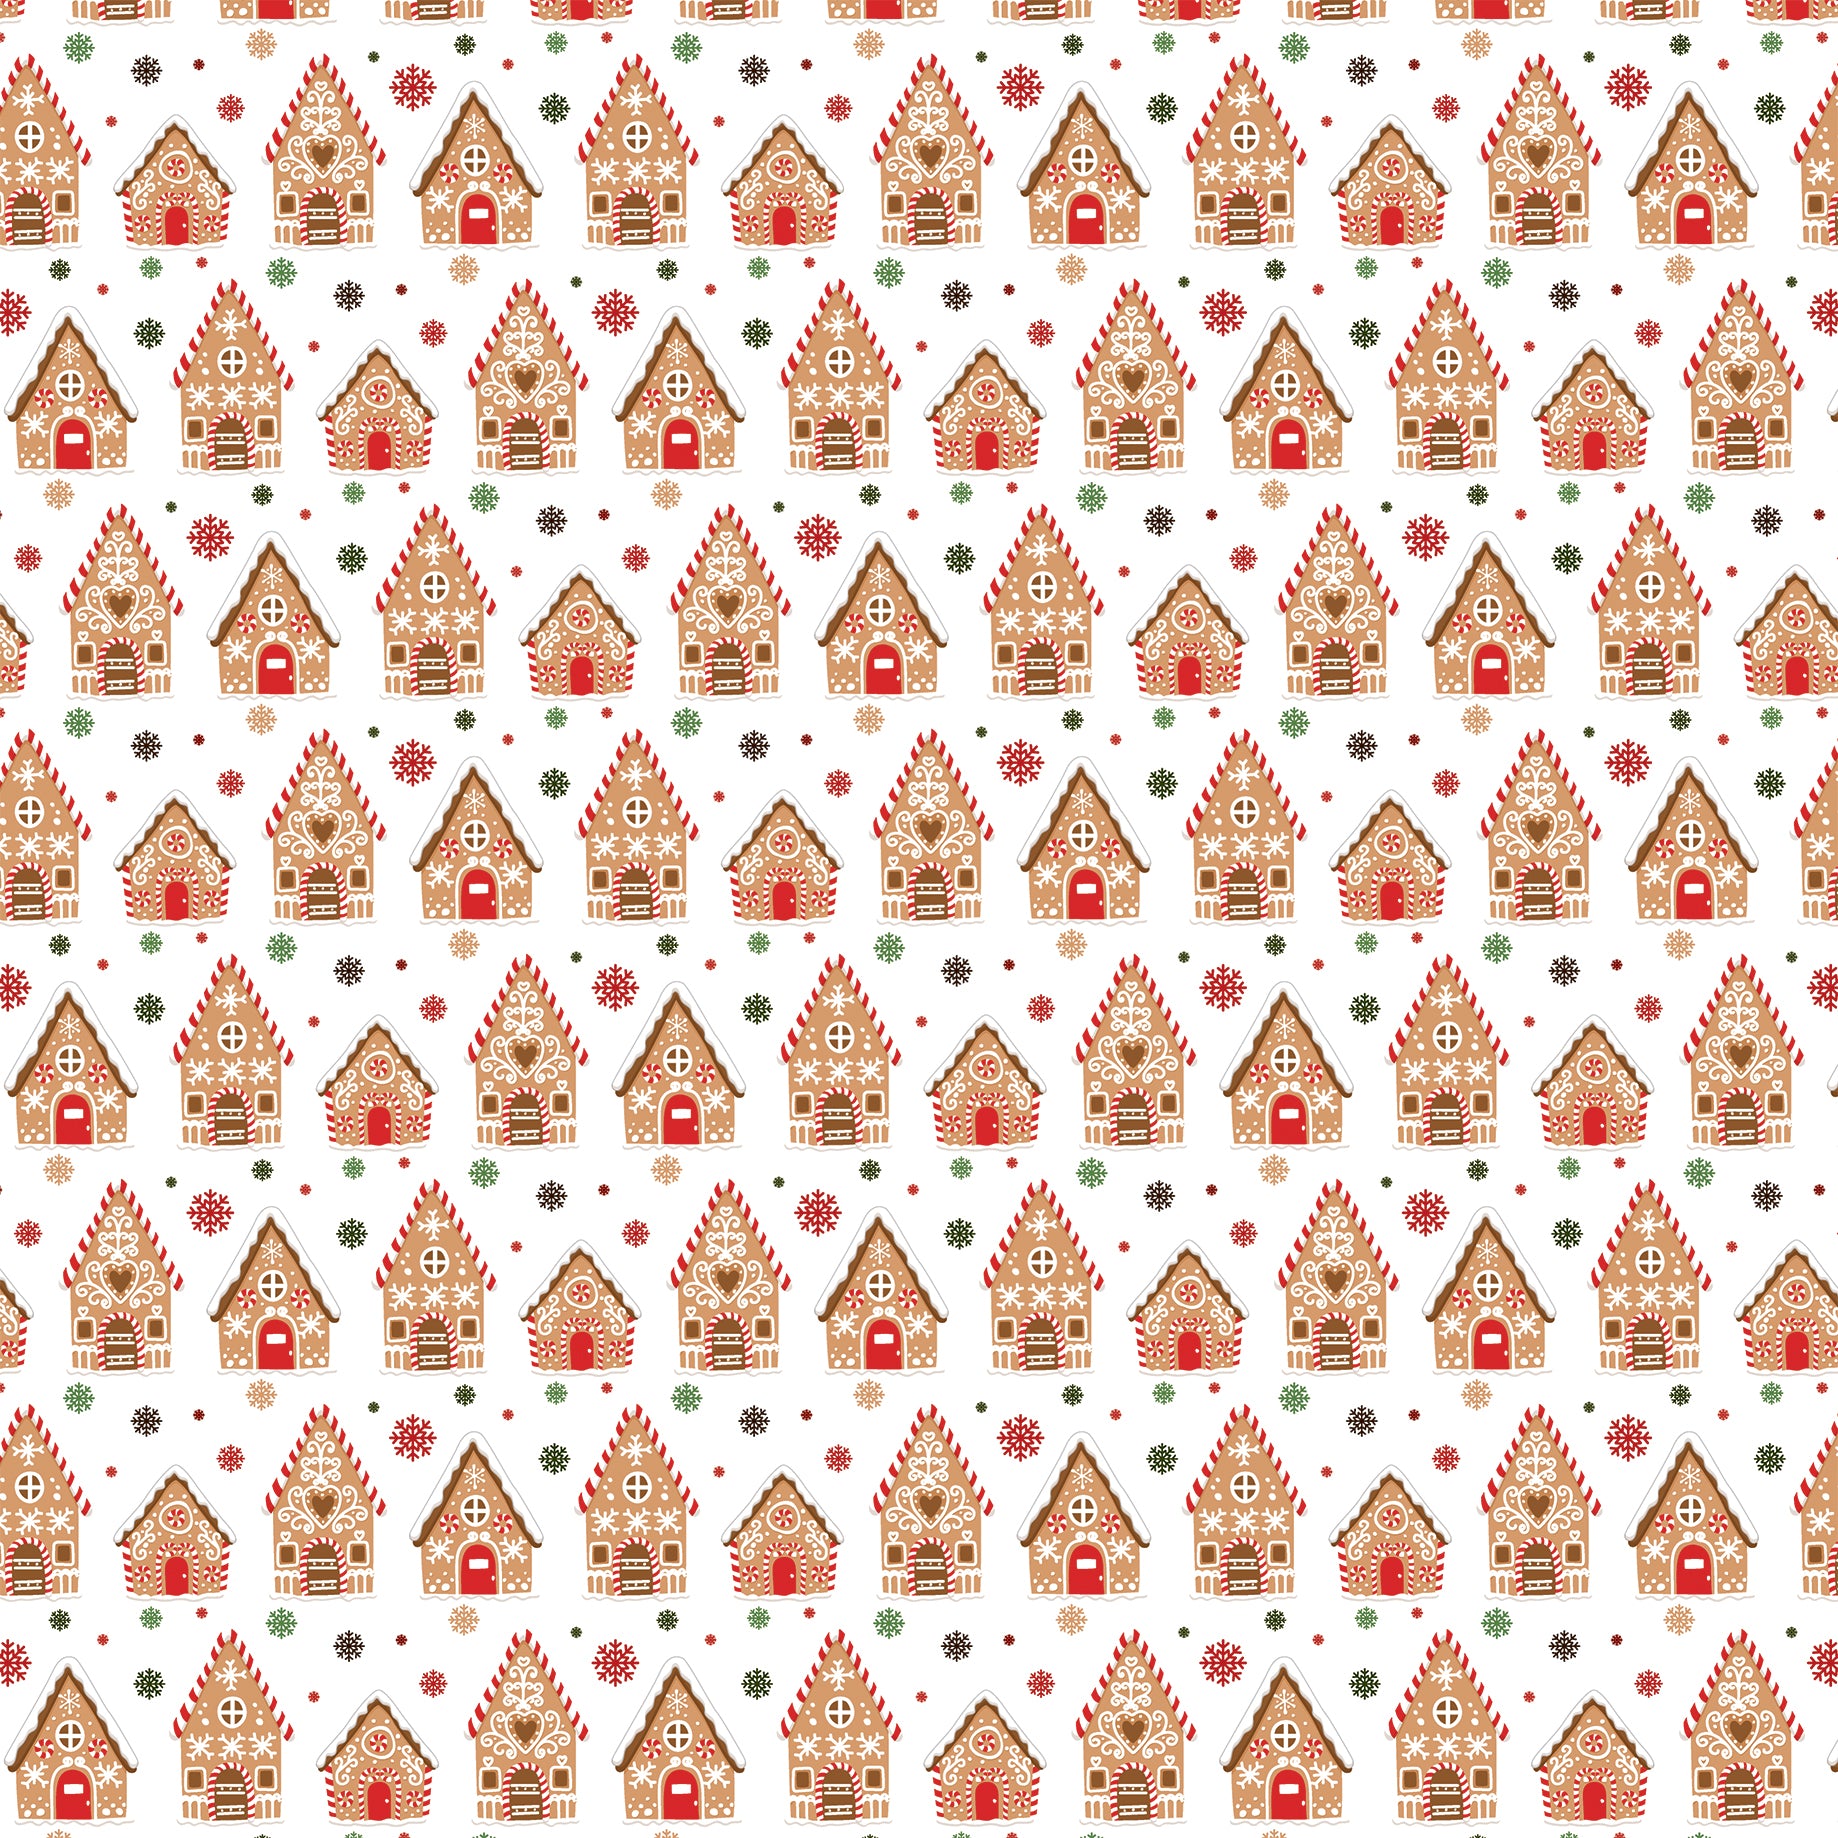 Have A Holly Jolly Christmas Collection Cozy Gingerbread House 12 x 12 Double-Sided Scrapbook Paper by Echo Park Paper